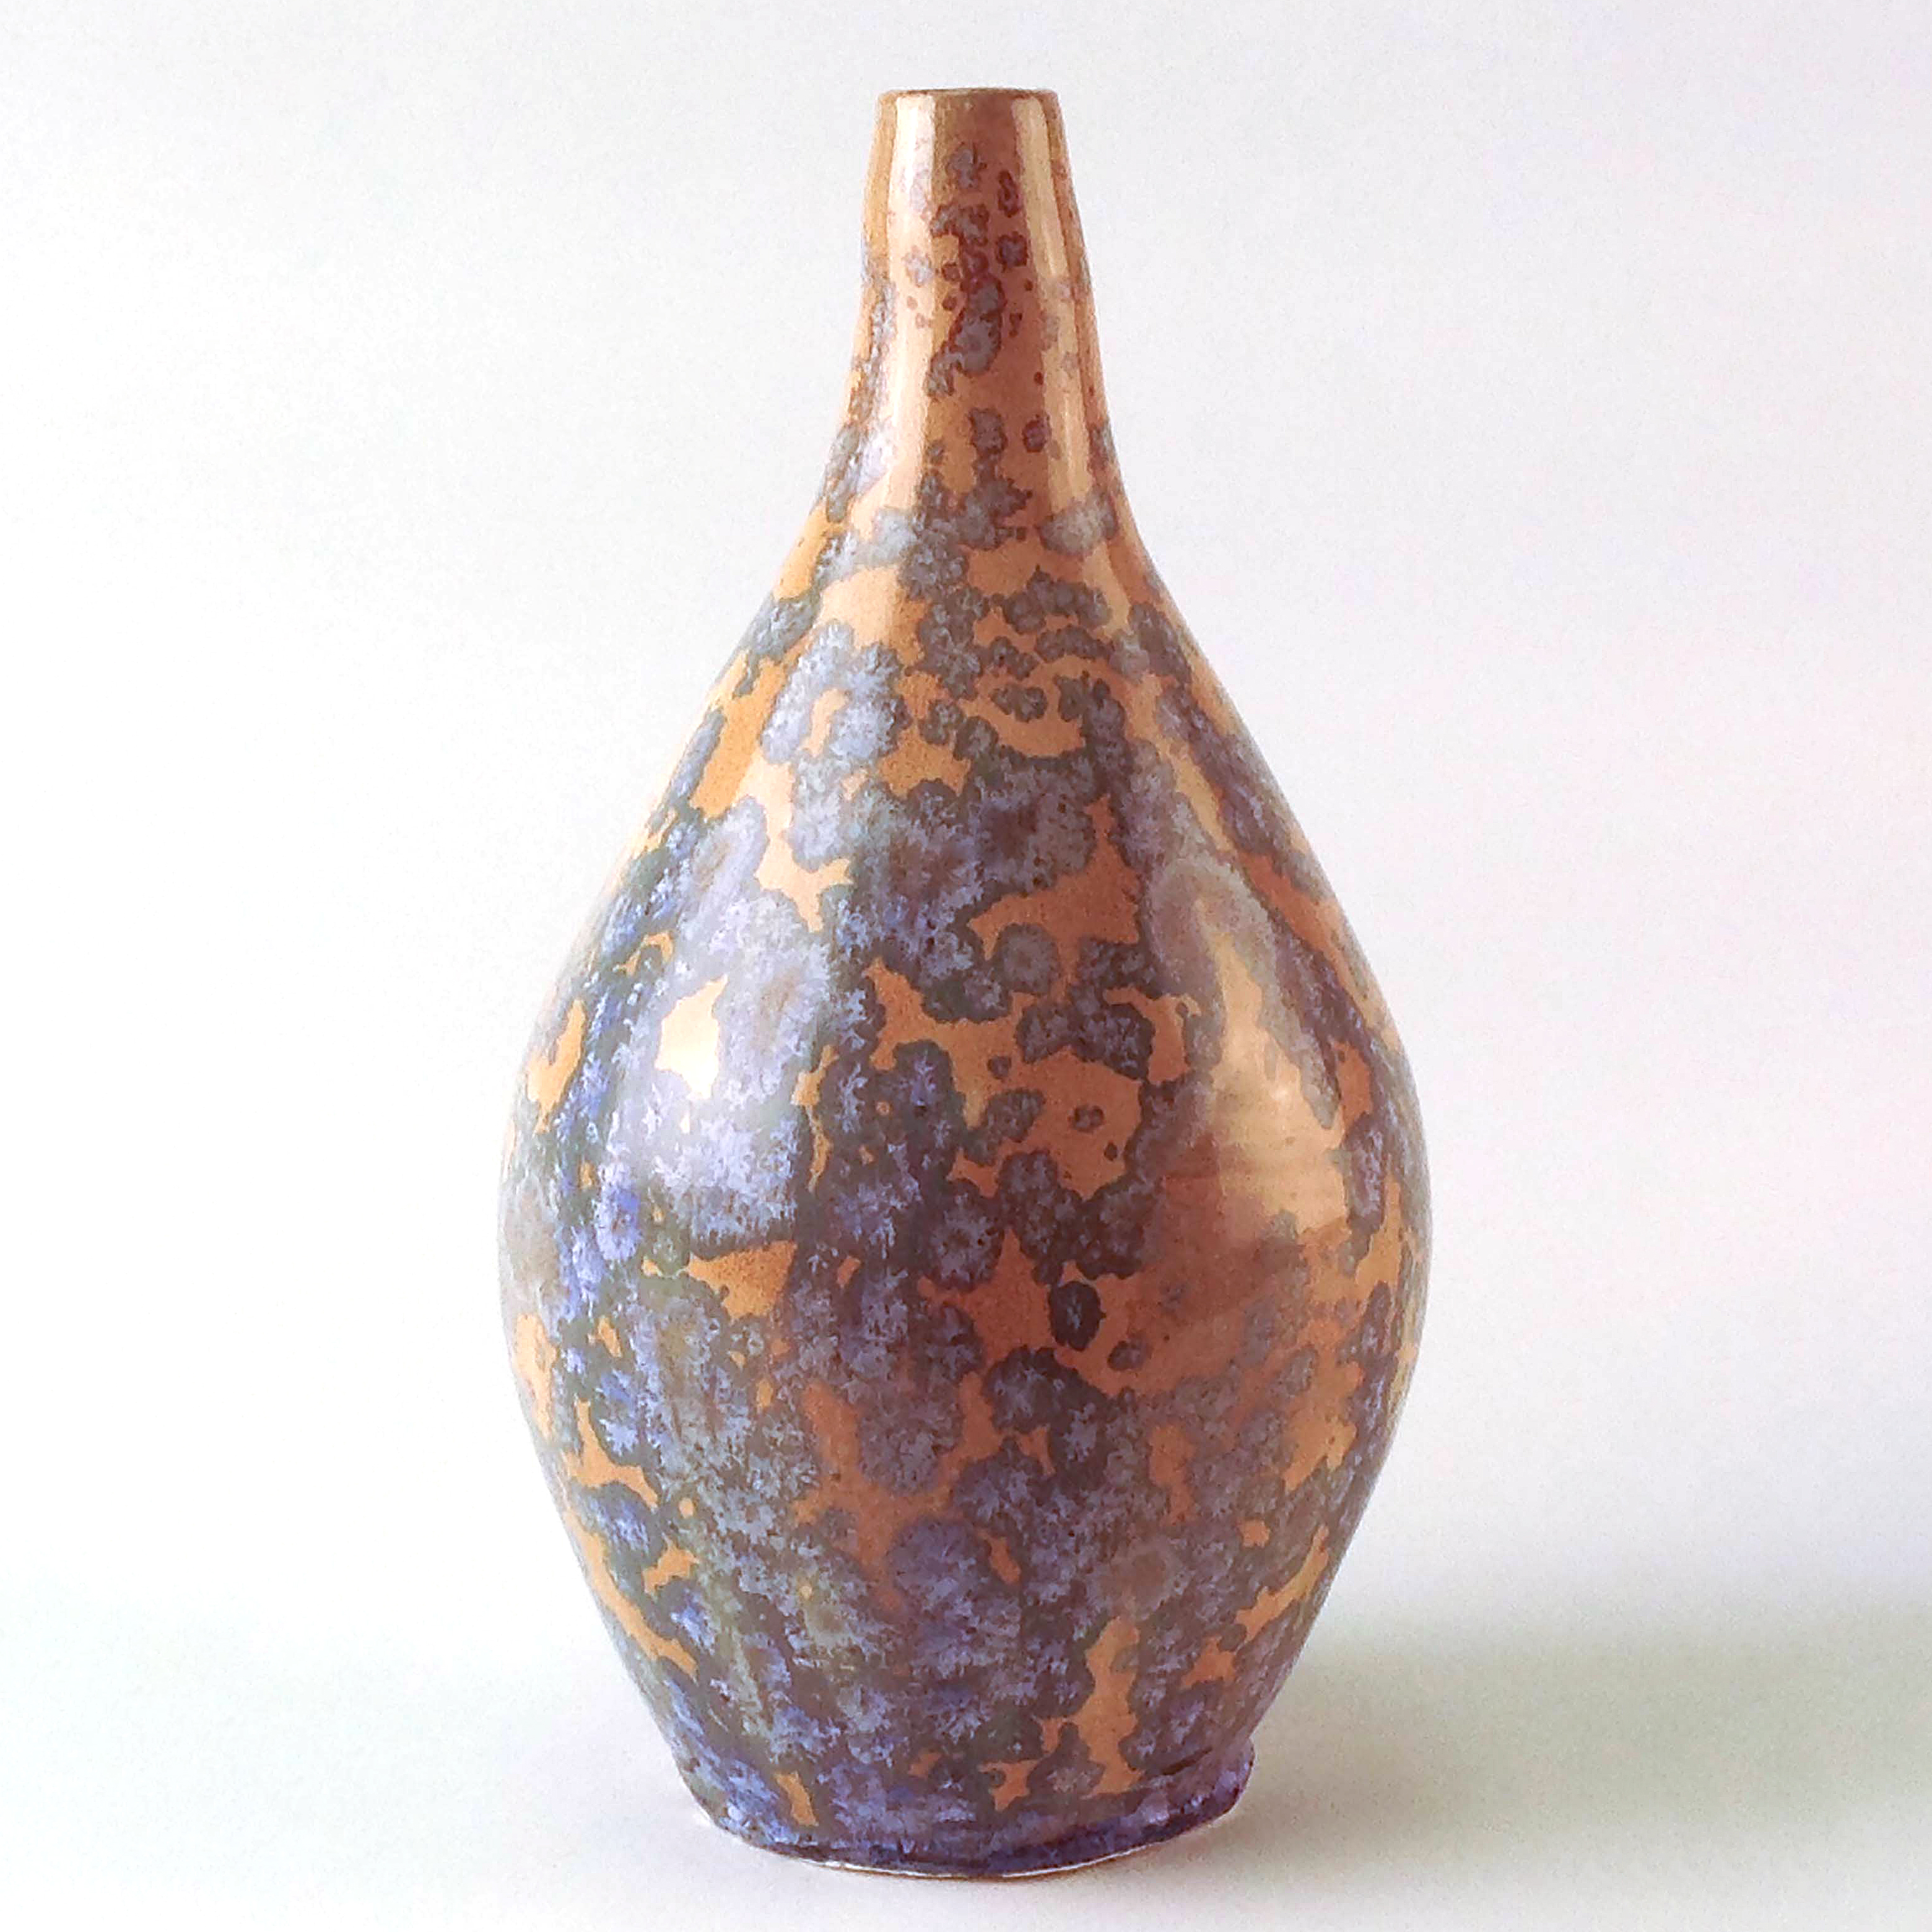 vase crated by a ceramics student